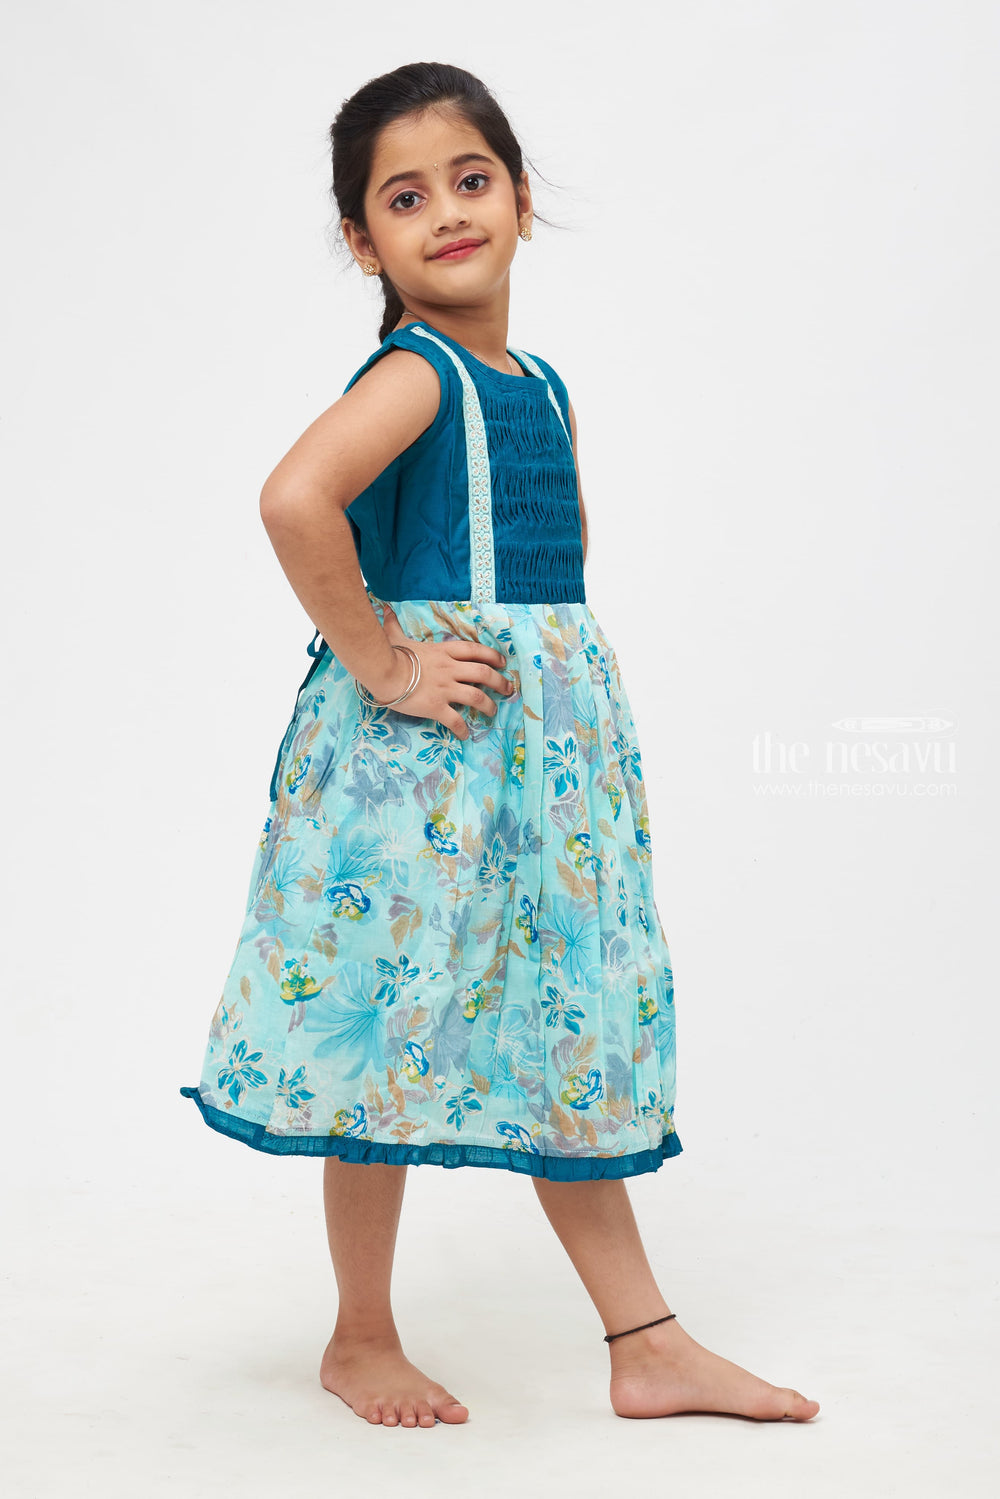 The Nesavu Girls Cotton Frock Natures Beauty in Fabric : Enchanted Teal Floral Fusion Dress with Lace Trimmings Nesavu A Twist to Traditional | Contemporary Cotton Frock Styles for Girls | The Nesavu